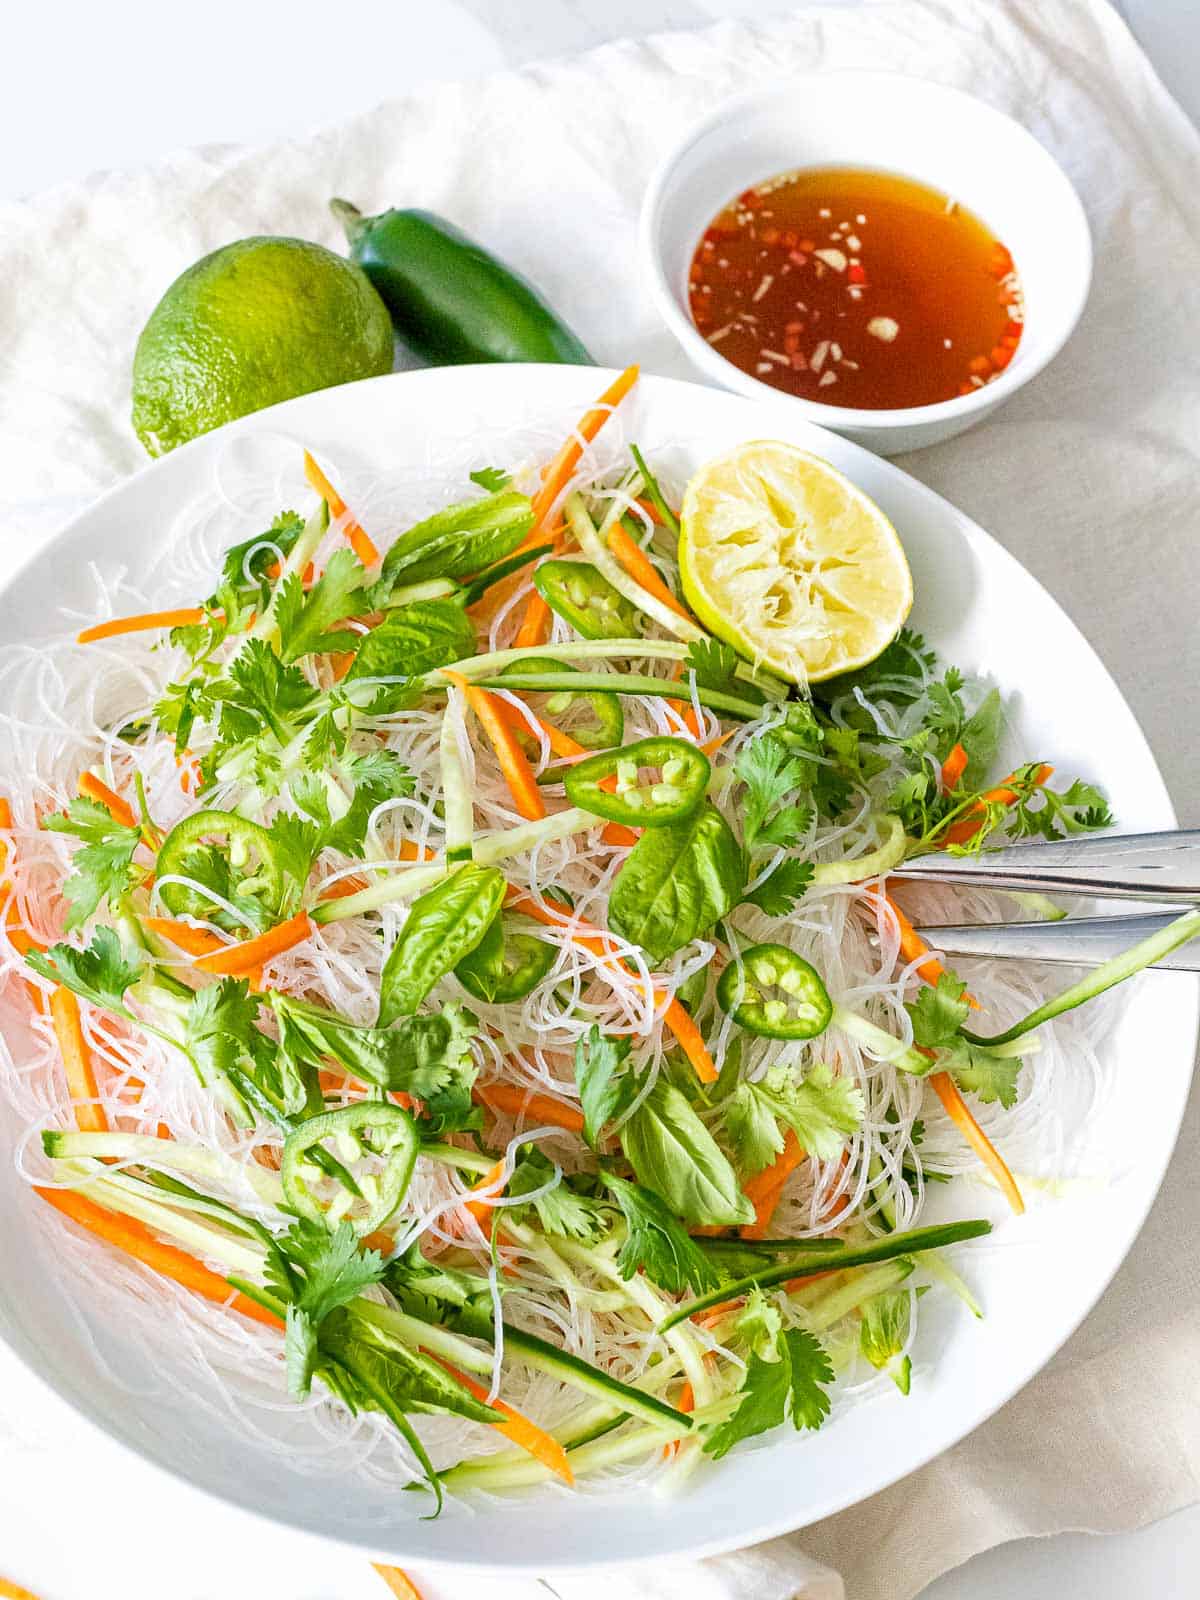 Vietnamese cold noodle salad tossed together with fresh herbs, jalapenos, carrots, and cucumber next to a bowl of tangy dressing.